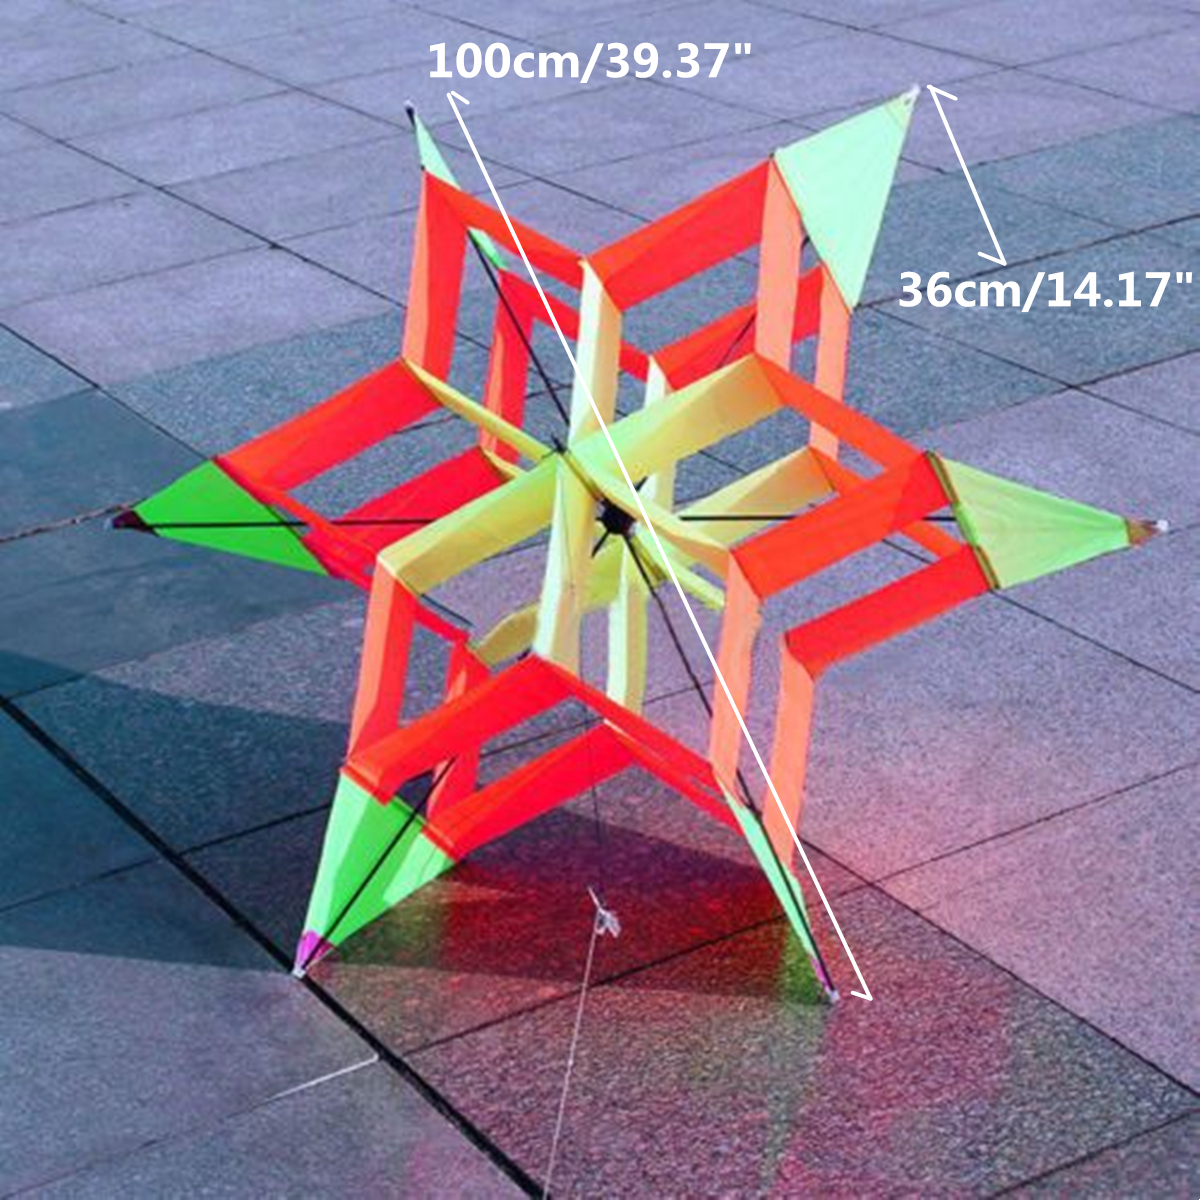 3D Colorful Flower Kite Single Line Outdoor sports Toy Light Wind Flying Kids 12